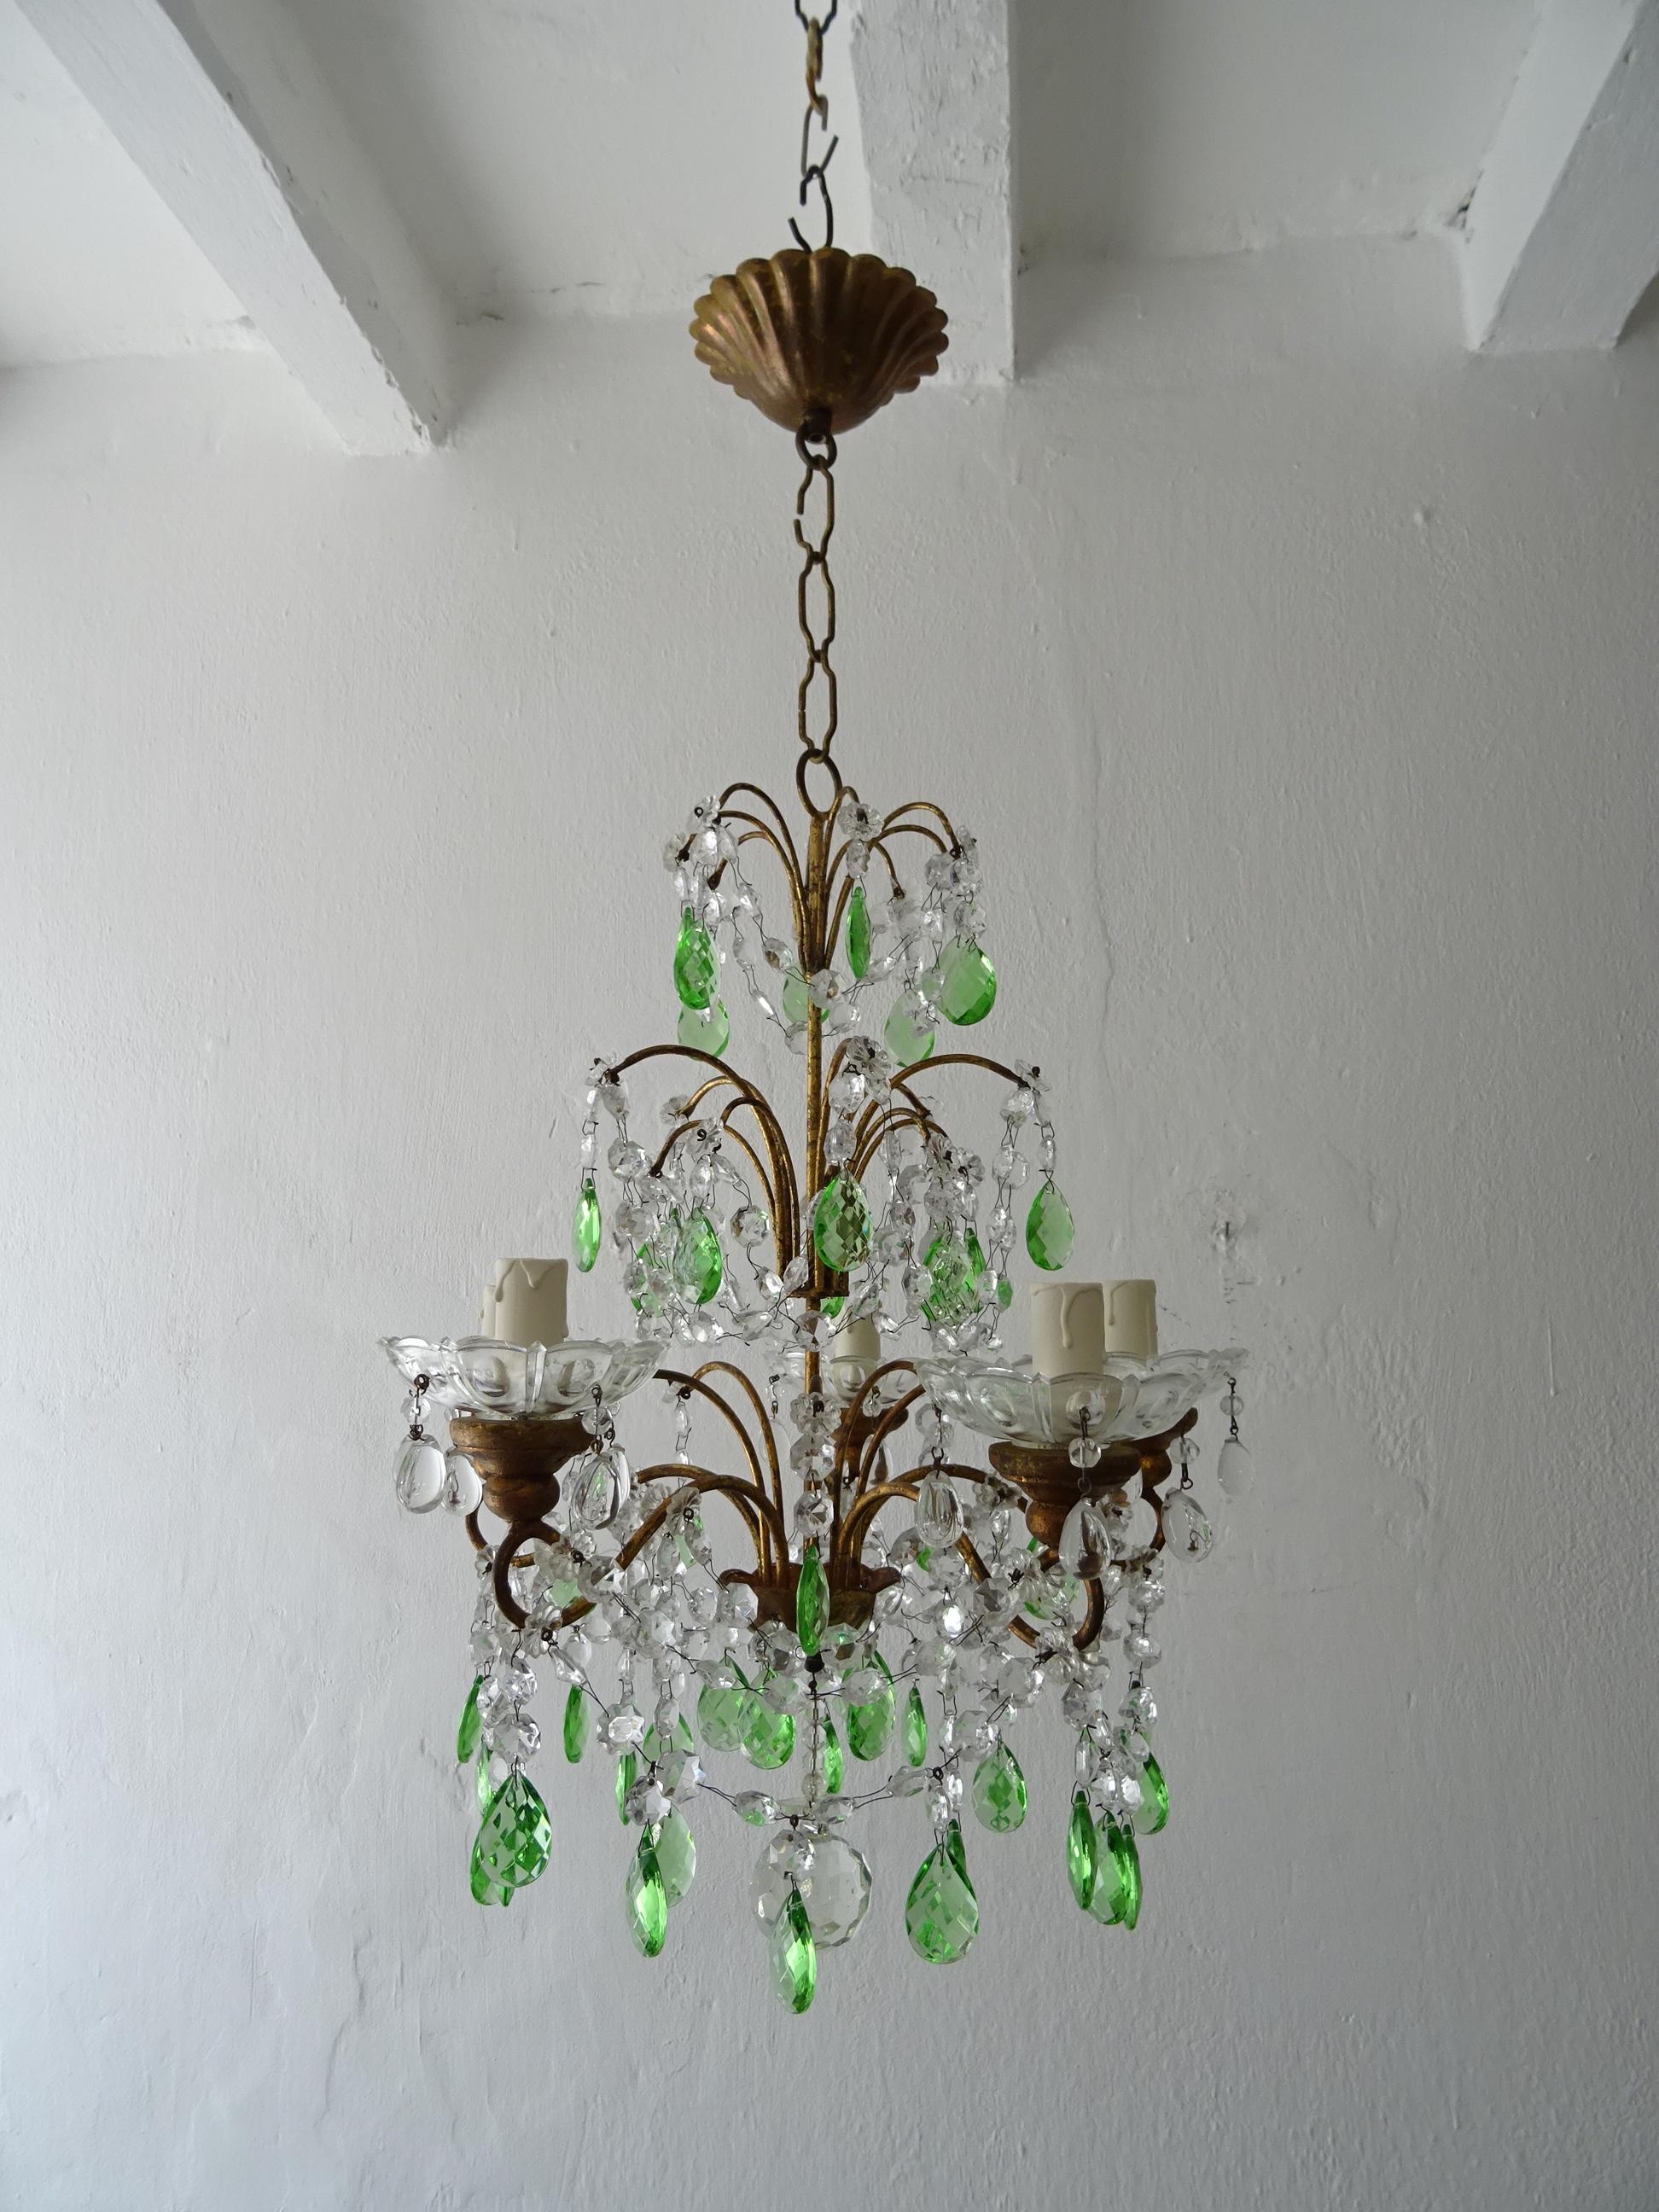 Italian Green Crystal Prisms Gold Gilt Wood Swags 4 Tier Chandelier, circa 1900 For Sale 2